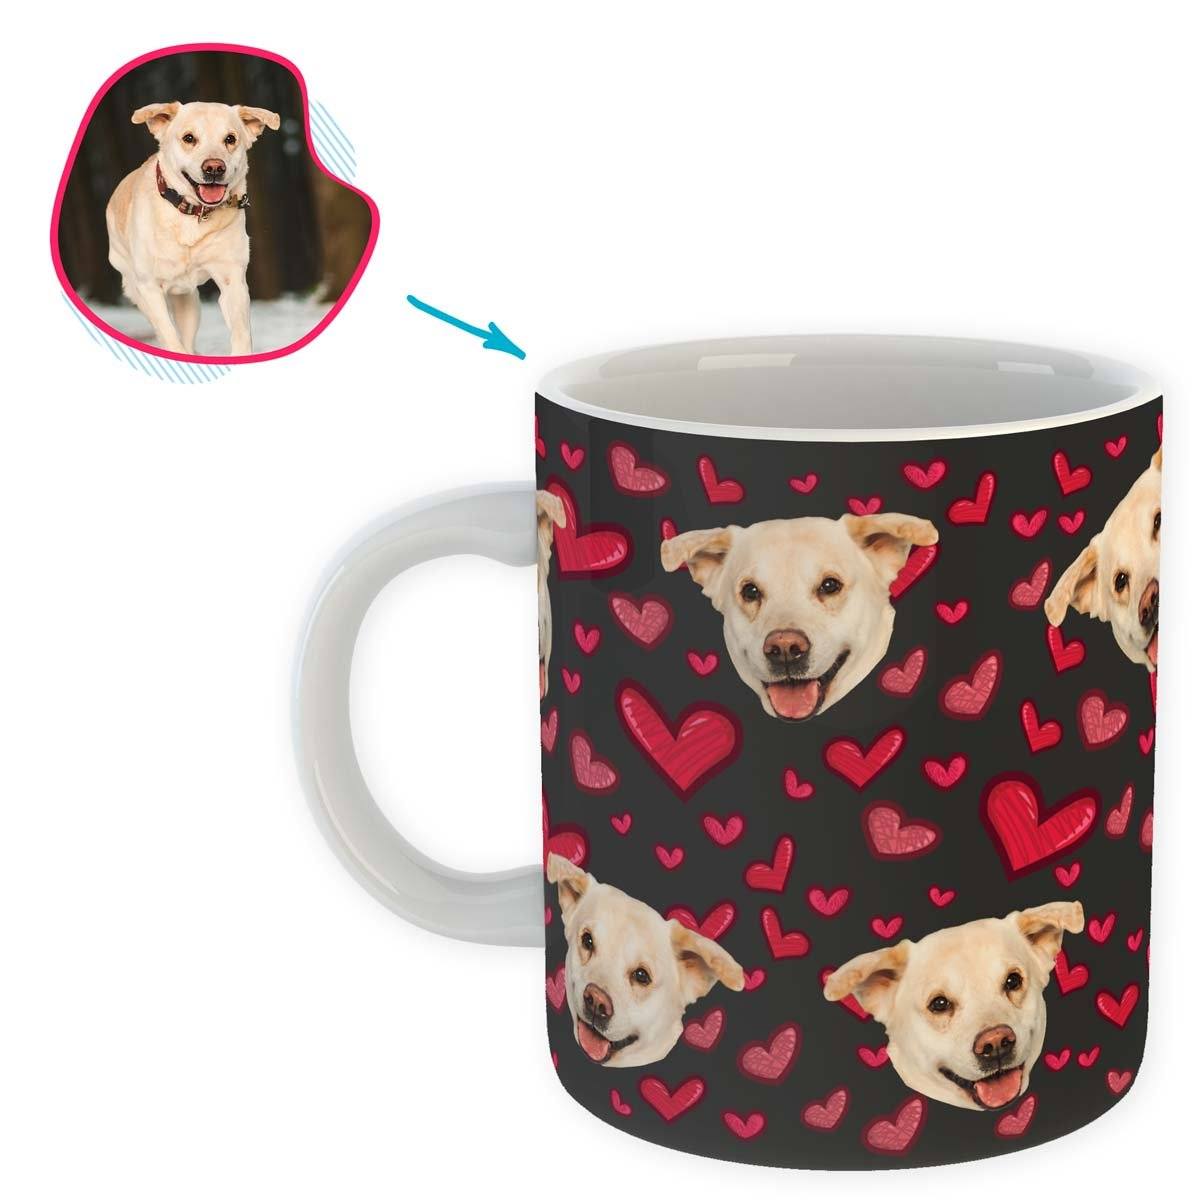 dark Heart mug personalized with photo of face printed on it